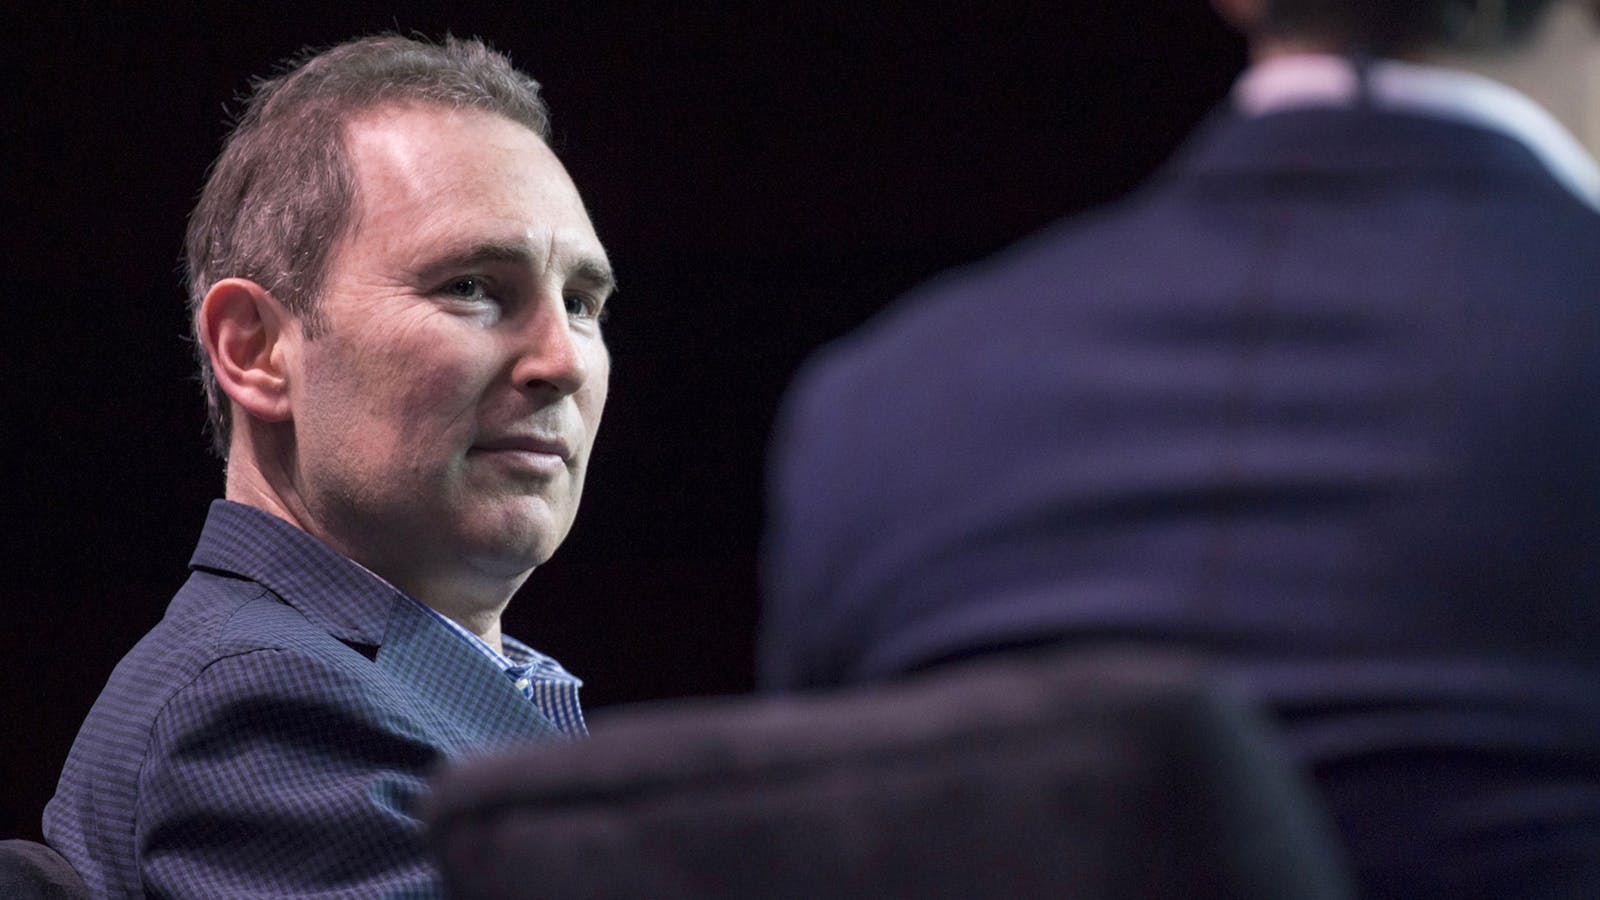 Amazon Web Services CEO Andy Jassy at a company event last year. Photo: Bloomberg